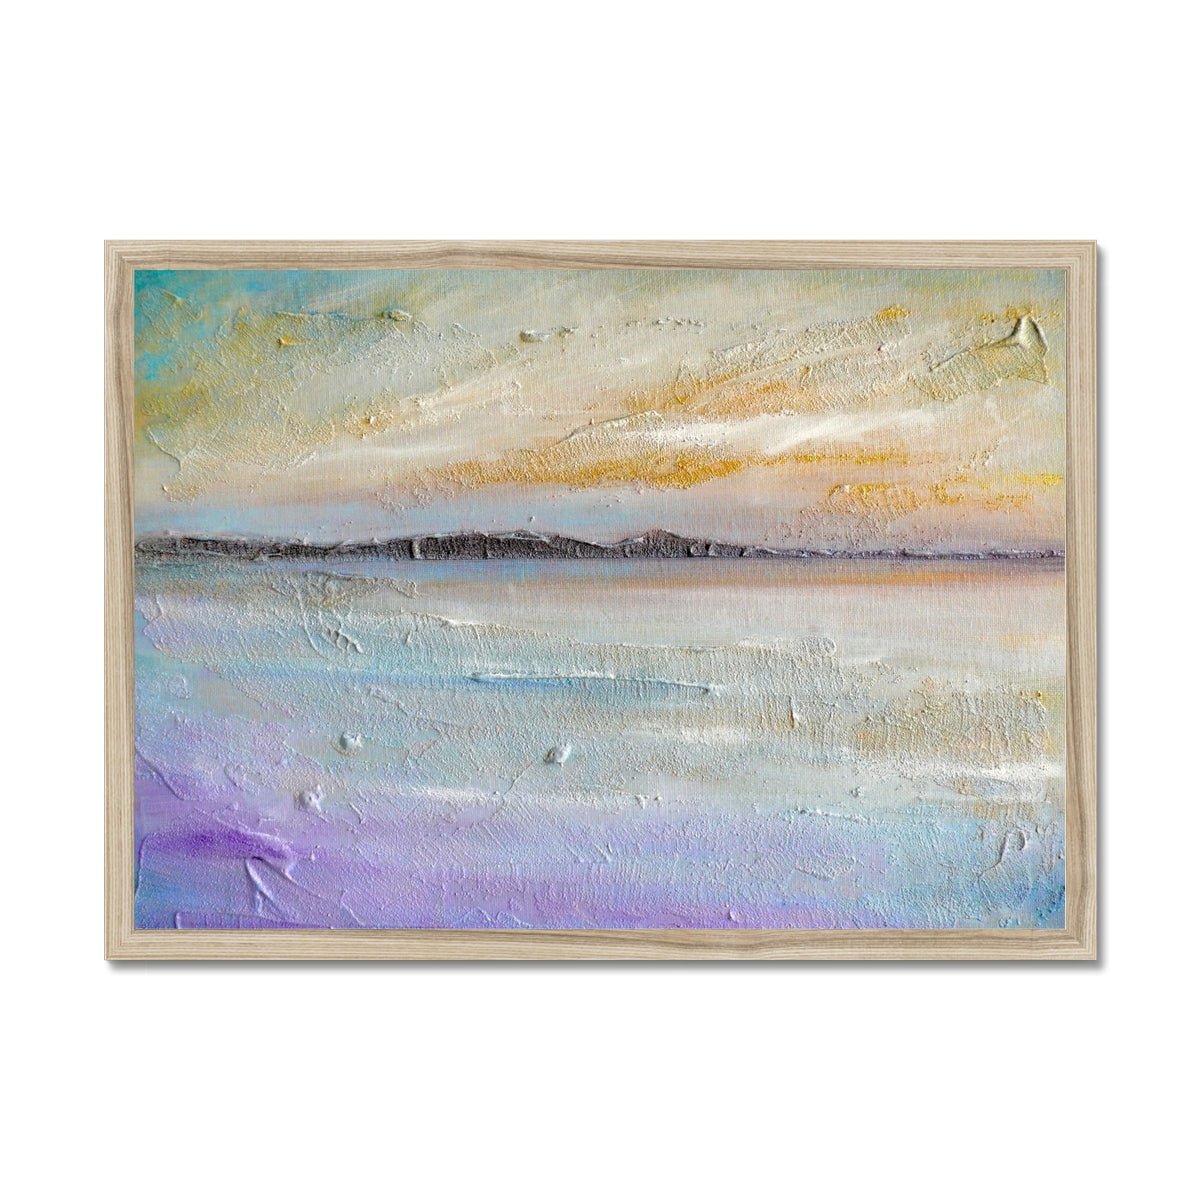 Sollas Beach North Uist Painting | Framed Prints From Scotland-Framed Prints-Hebridean Islands Art Gallery-A2 Landscape-Natural Frame-Paintings, Prints, Homeware, Art Gifts From Scotland By Scottish Artist Kevin Hunter